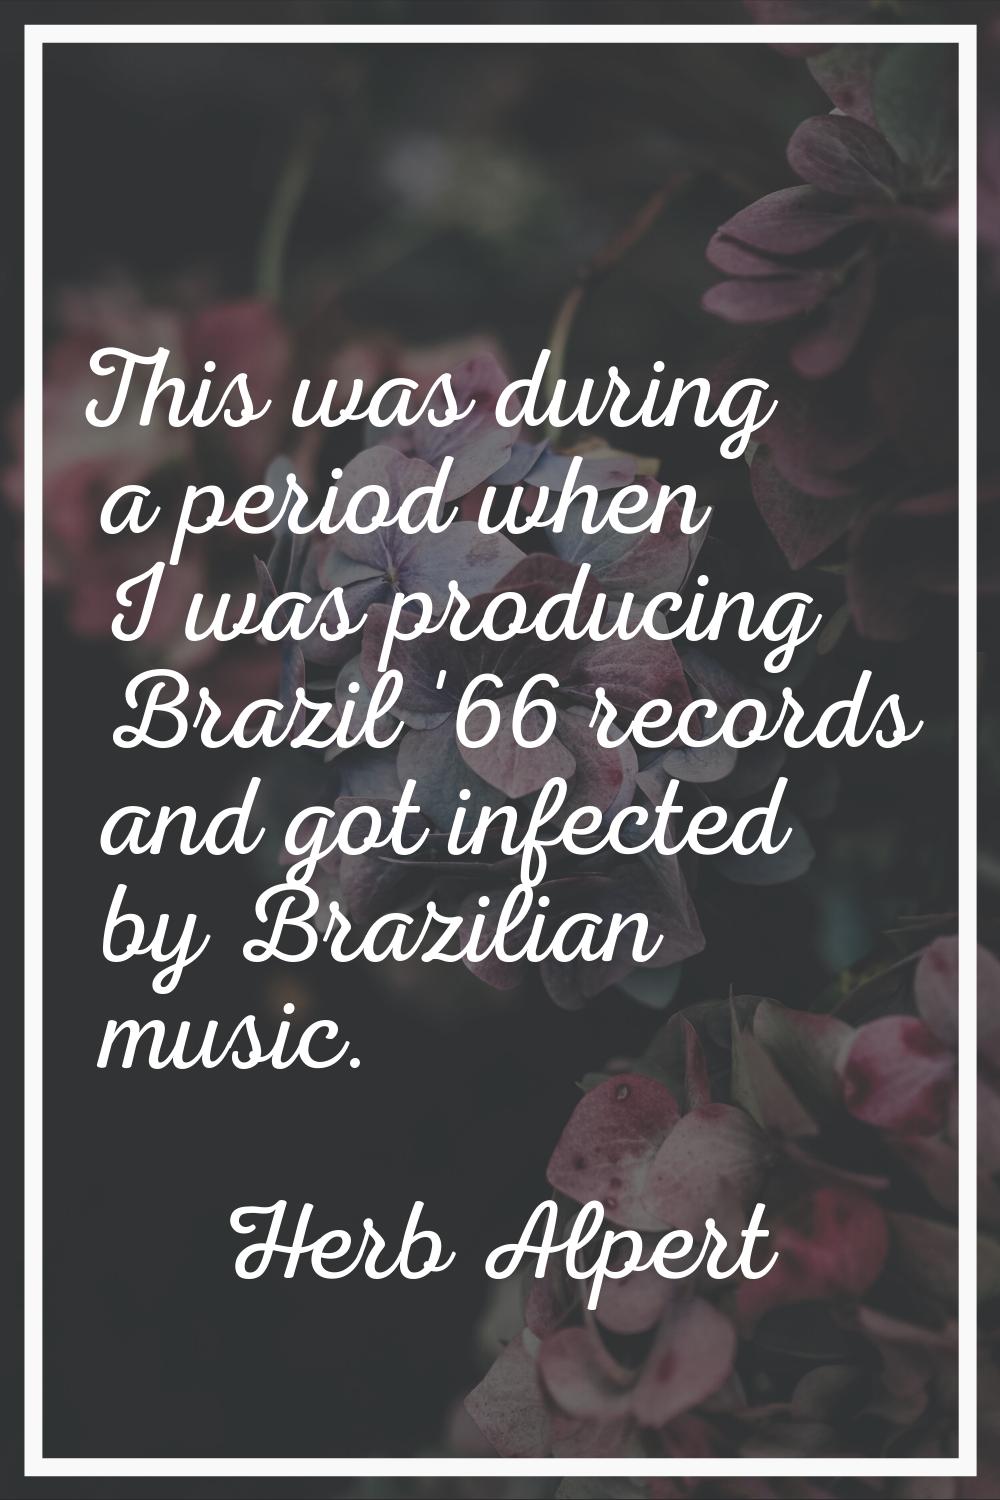 This was during a period when I was producing Brazil '66 records and got infected by Brazilian musi